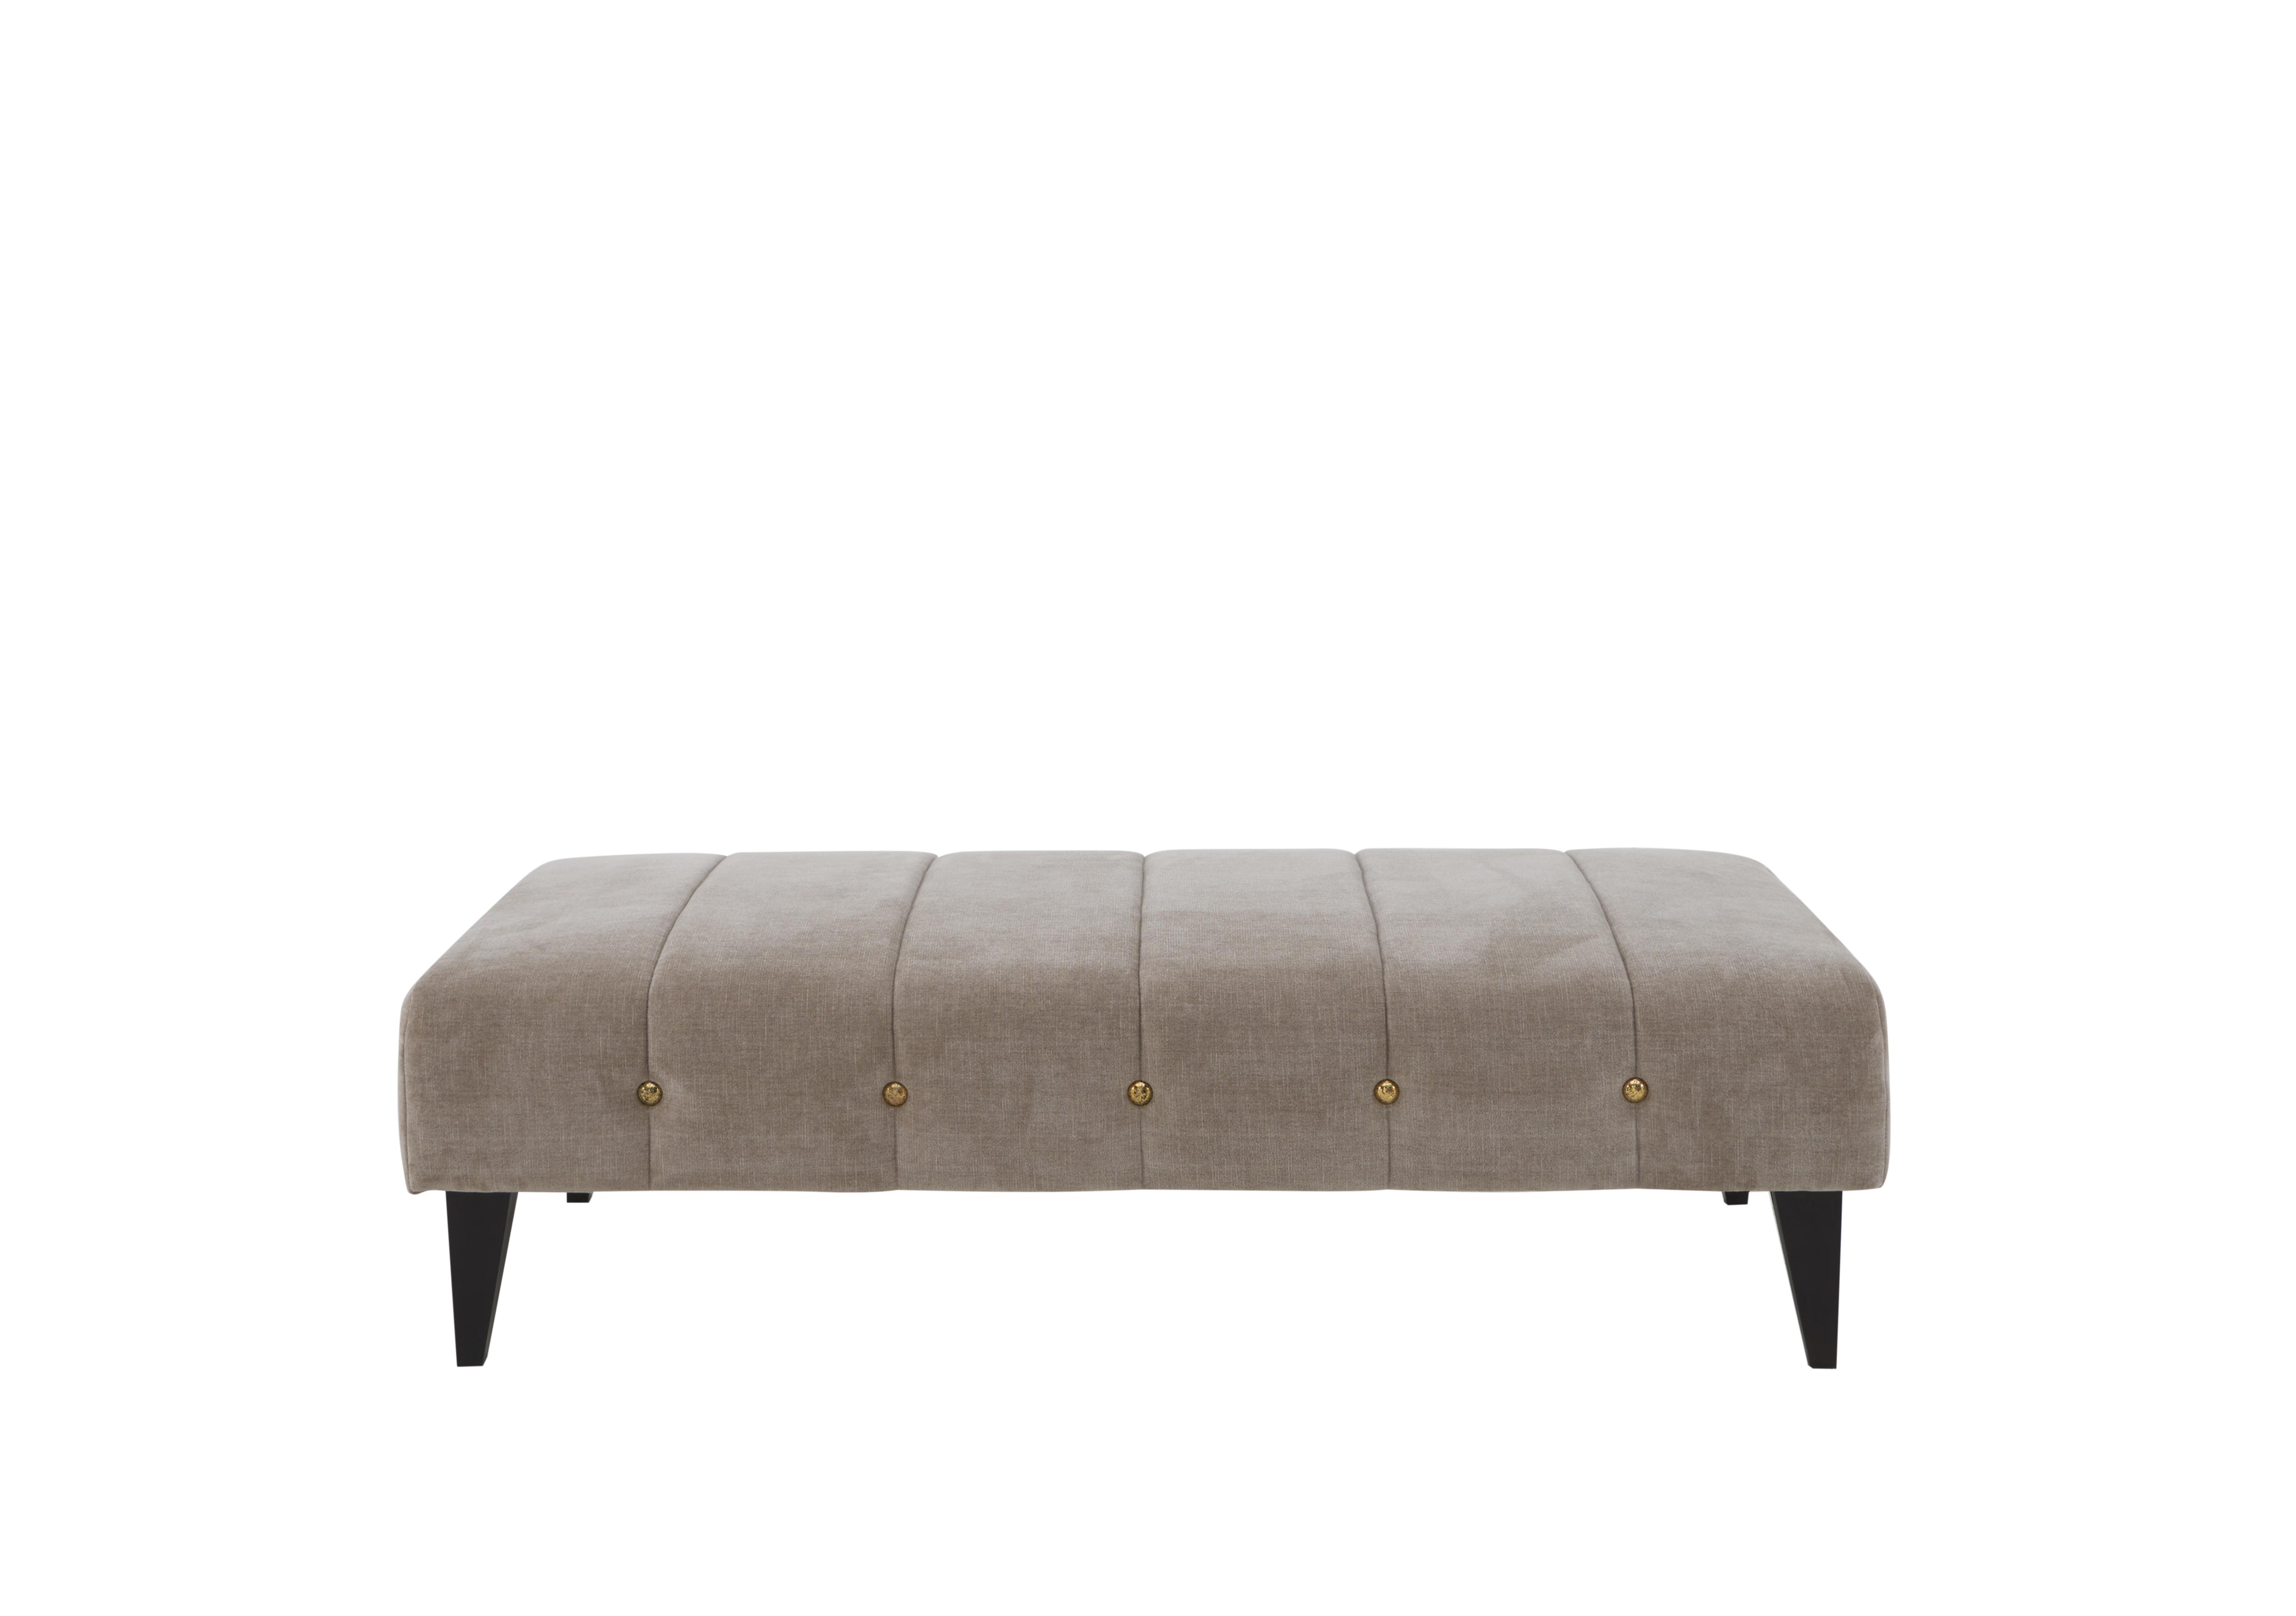 Sumptuous Fabric Bench Footstool in Chamonix Wicker Dk/Gold on Furniture Village